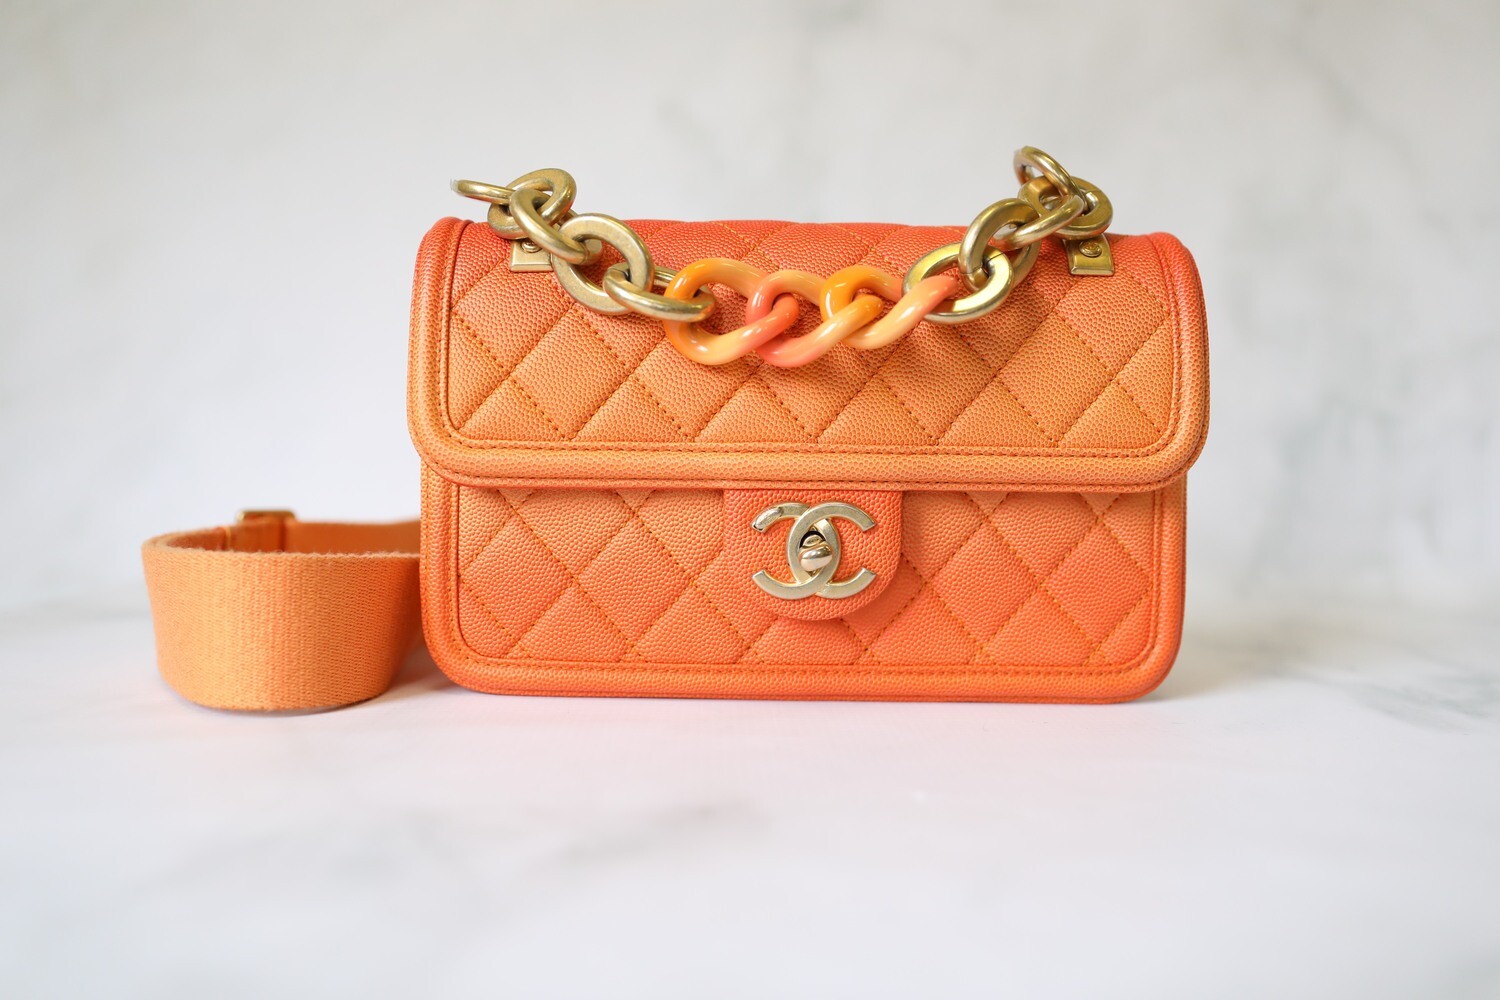 Chanel Sunset By The Sea Bag, Orange Ombre Caviar With Gold Hardware, Mini,  Preowned In Dustbag